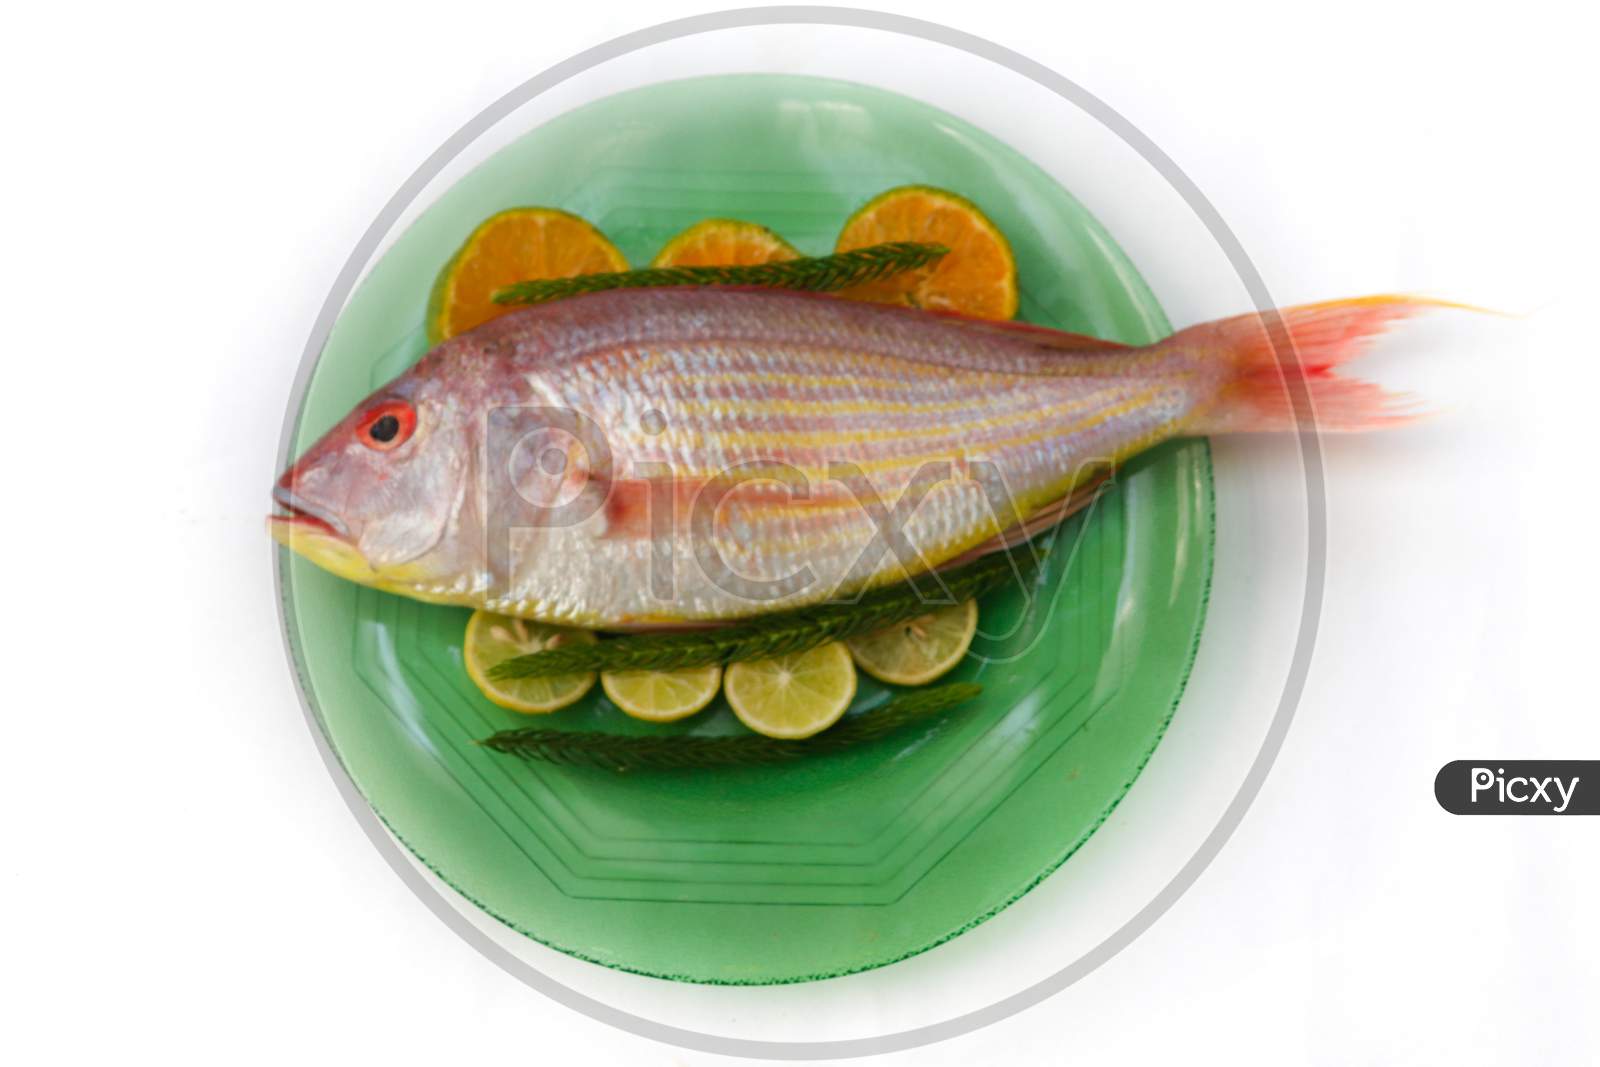 Close Up View Of Fresh Pink Perch (Thread Finned Bream) Decorated With Lemon Slice,Orange Slice And Curry Leaves On A Glass Plate,White Background,Selective Focus.